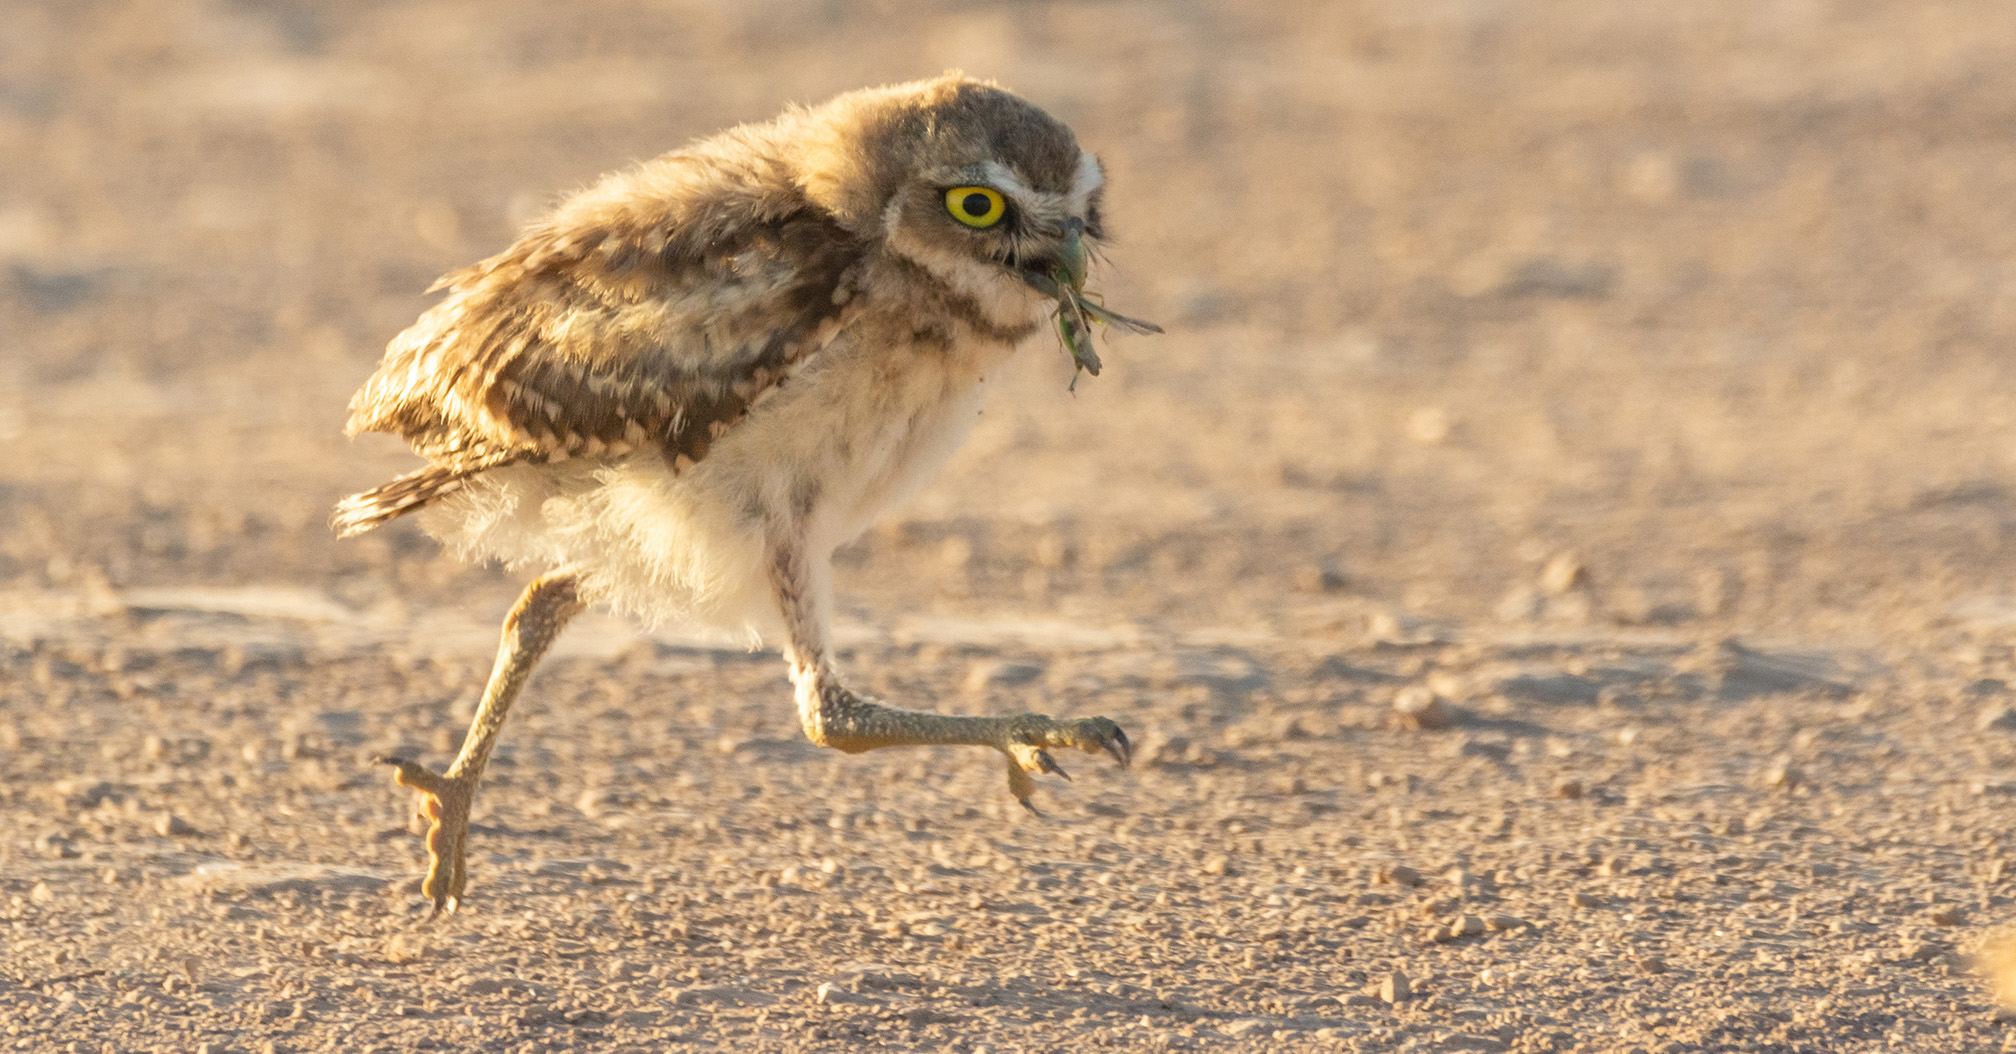 A young burrowing owl runs across the ground with a green grasshopper in its bill. The owls feathers are fuffy. They are brown on its back and top of heard and white on its belly and chest. Its face is brown with horizontal stripes of white across its chin and forehead and it has striking yellow eyes that have a black center.